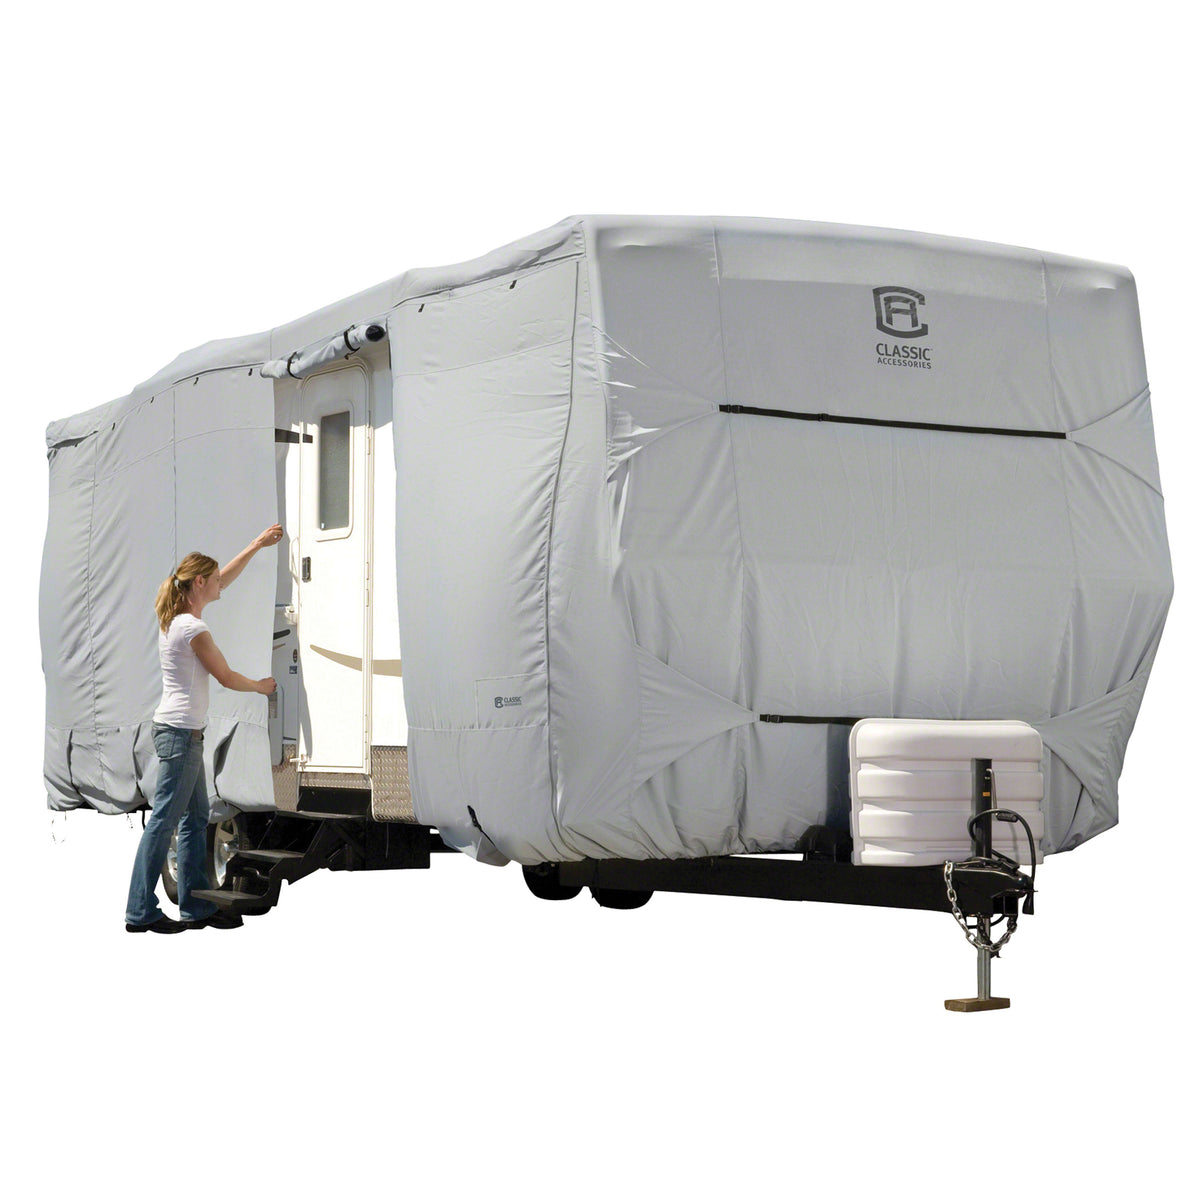 Classic Accessories 80-138-181001-00 Over Drive PermaPRO Travel Trailer Cover - 27' to 30' L x 118" H